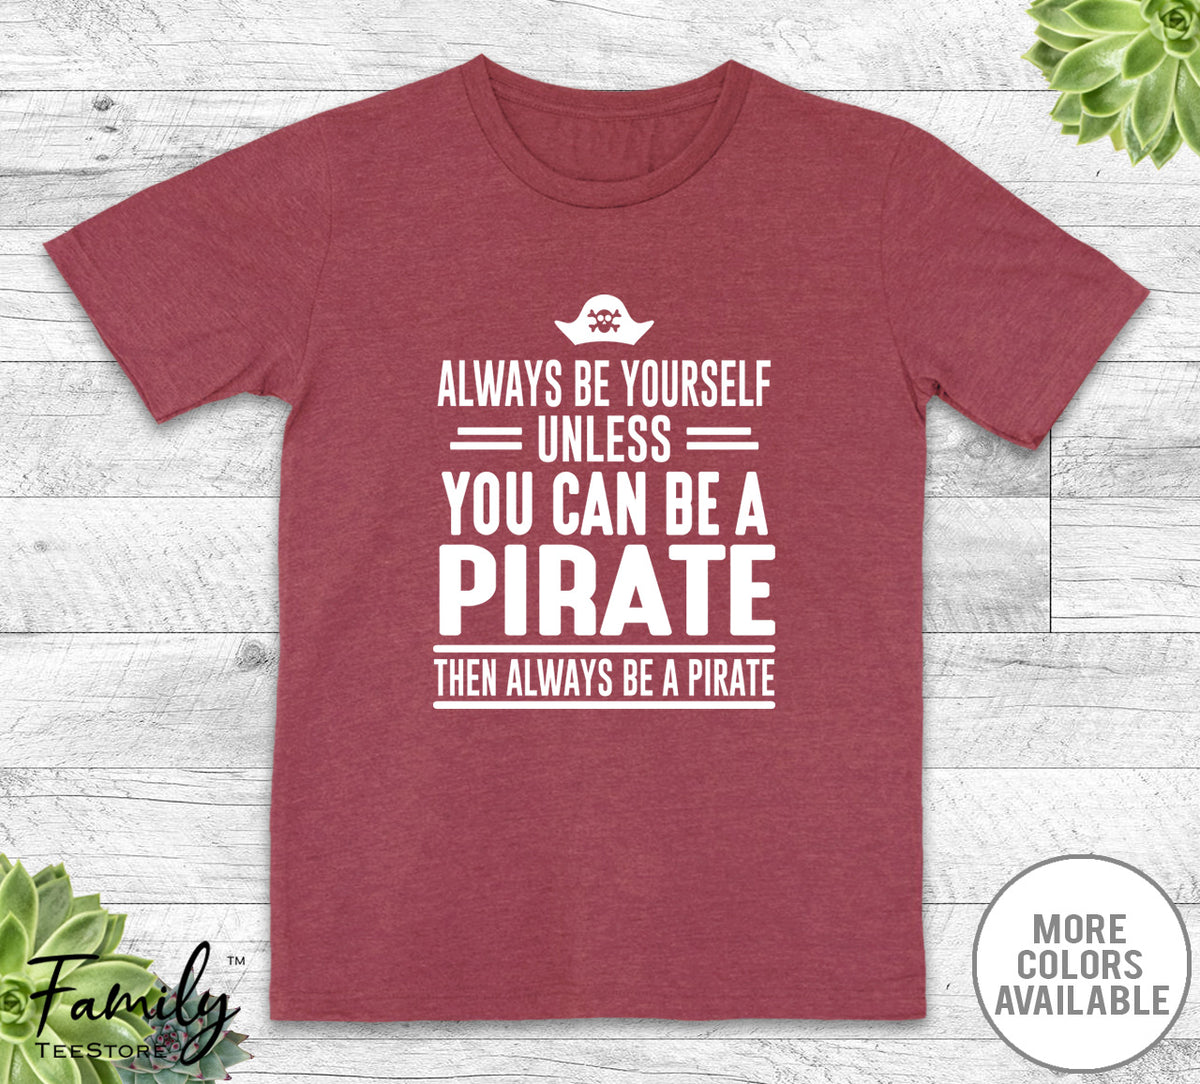 wildwindapparel.com Always Be Yourself Unless You Can Be A Pirate - Unisex T-Shirt - Pirate Shirt - Pirate Gift Heather Cardinal / Small